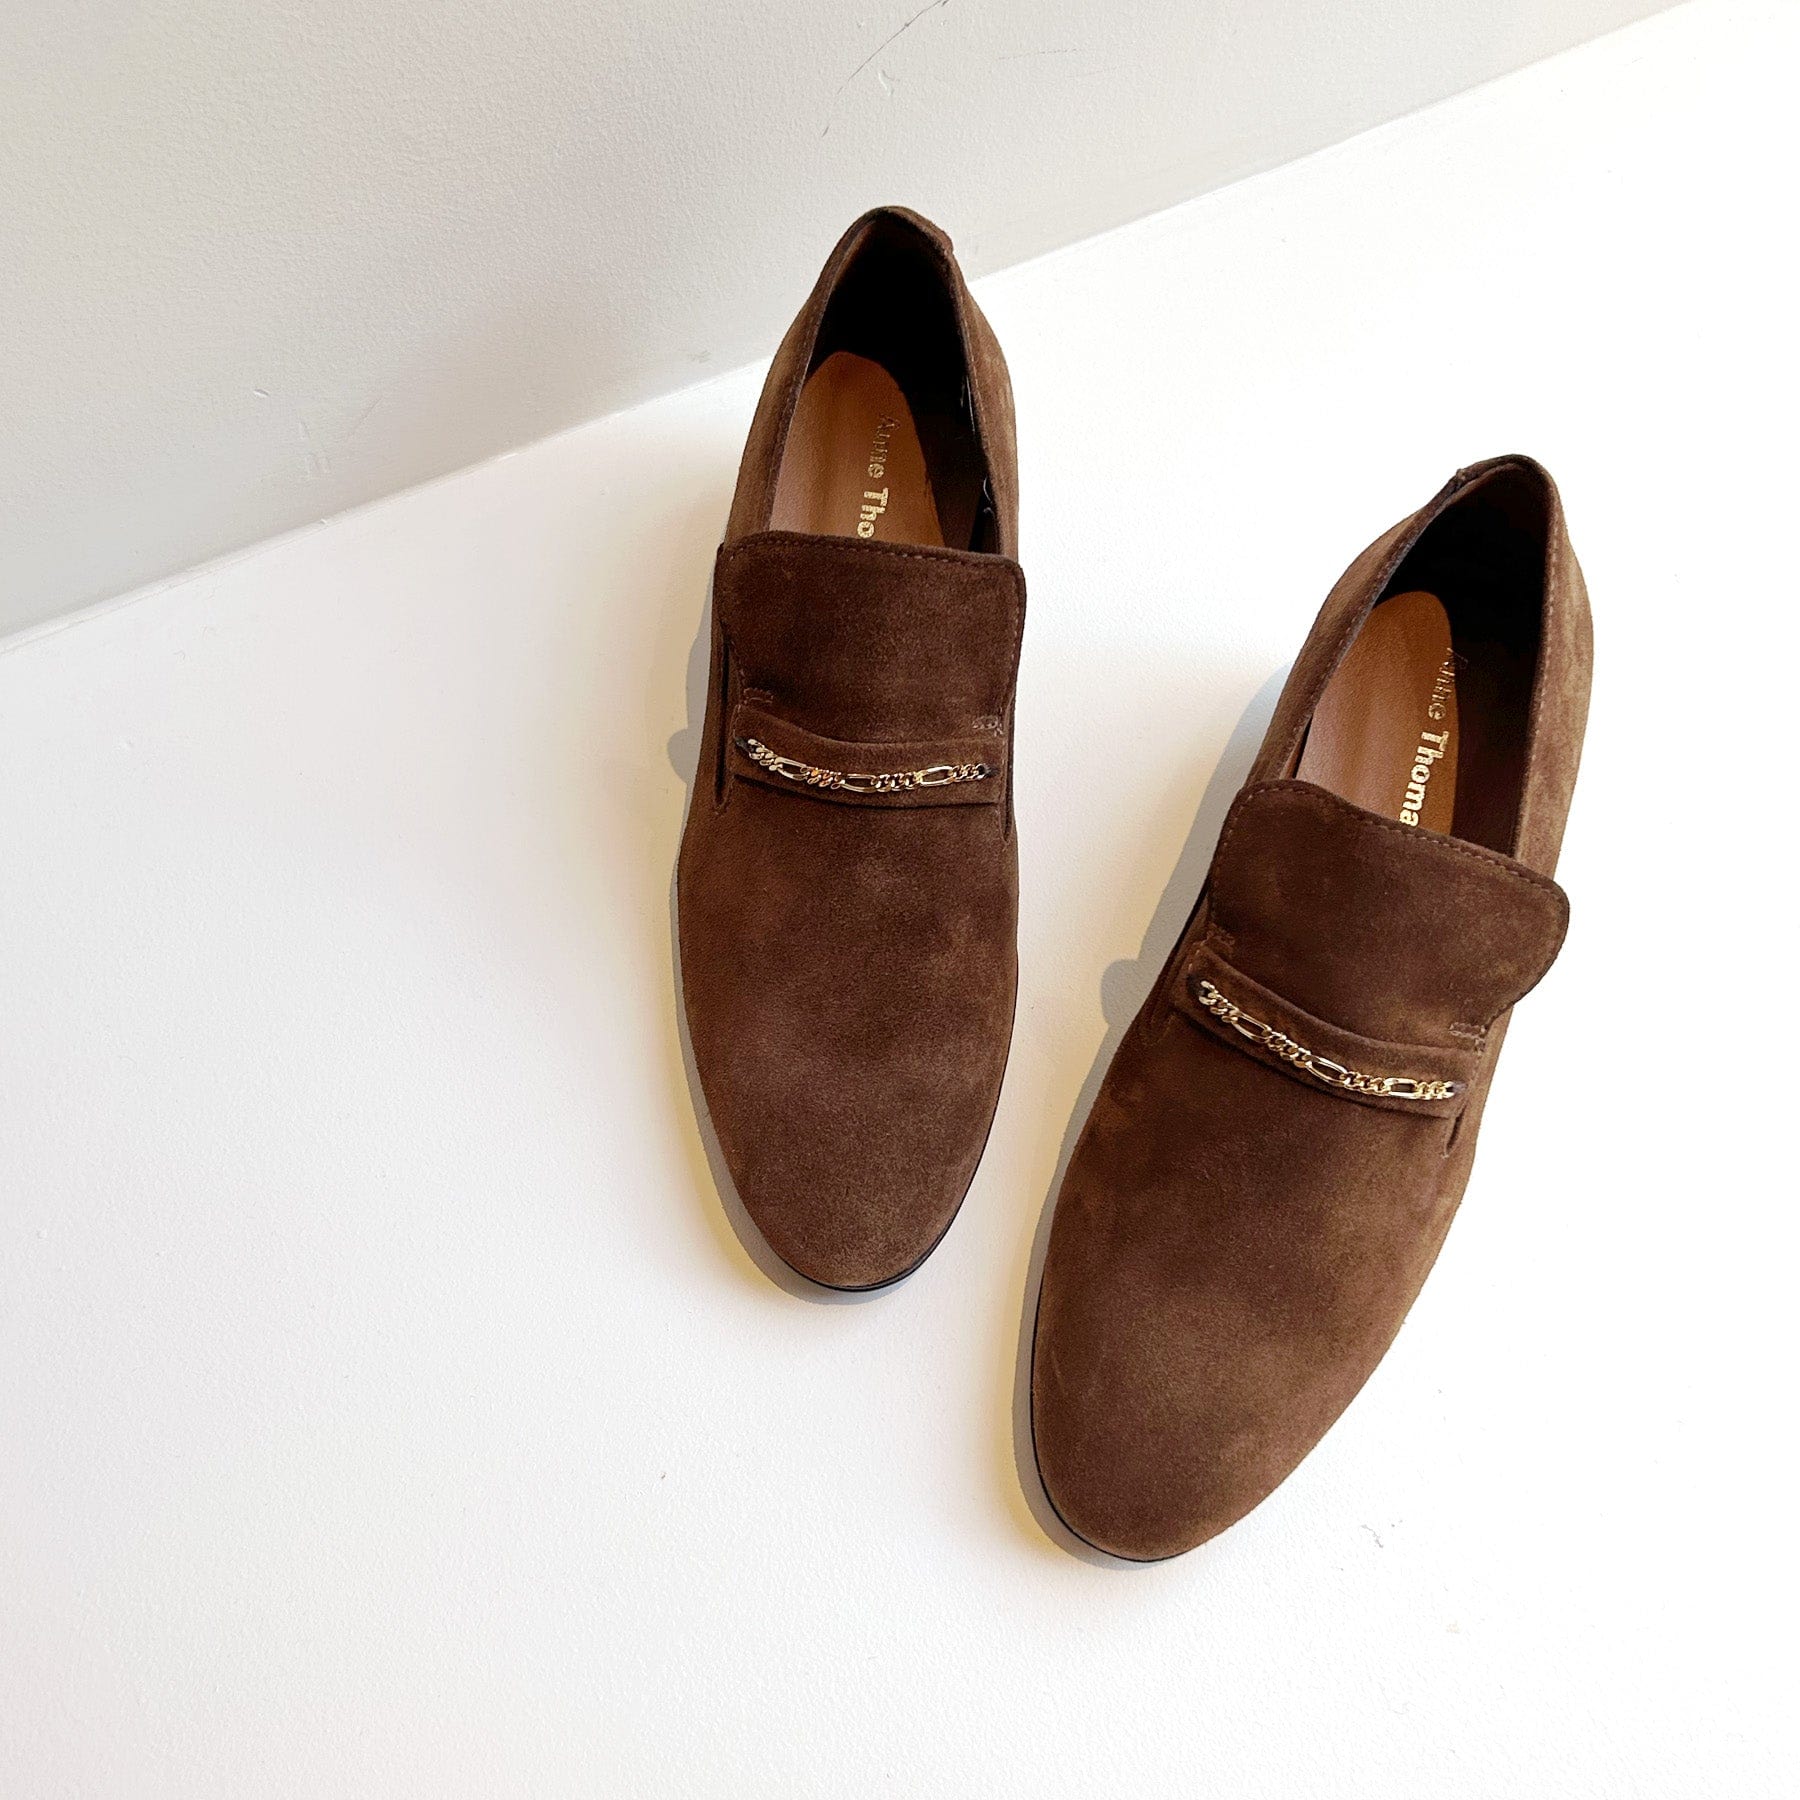 Montana Loafer in Chestnut Suede Shoes Anne Thomas 37  